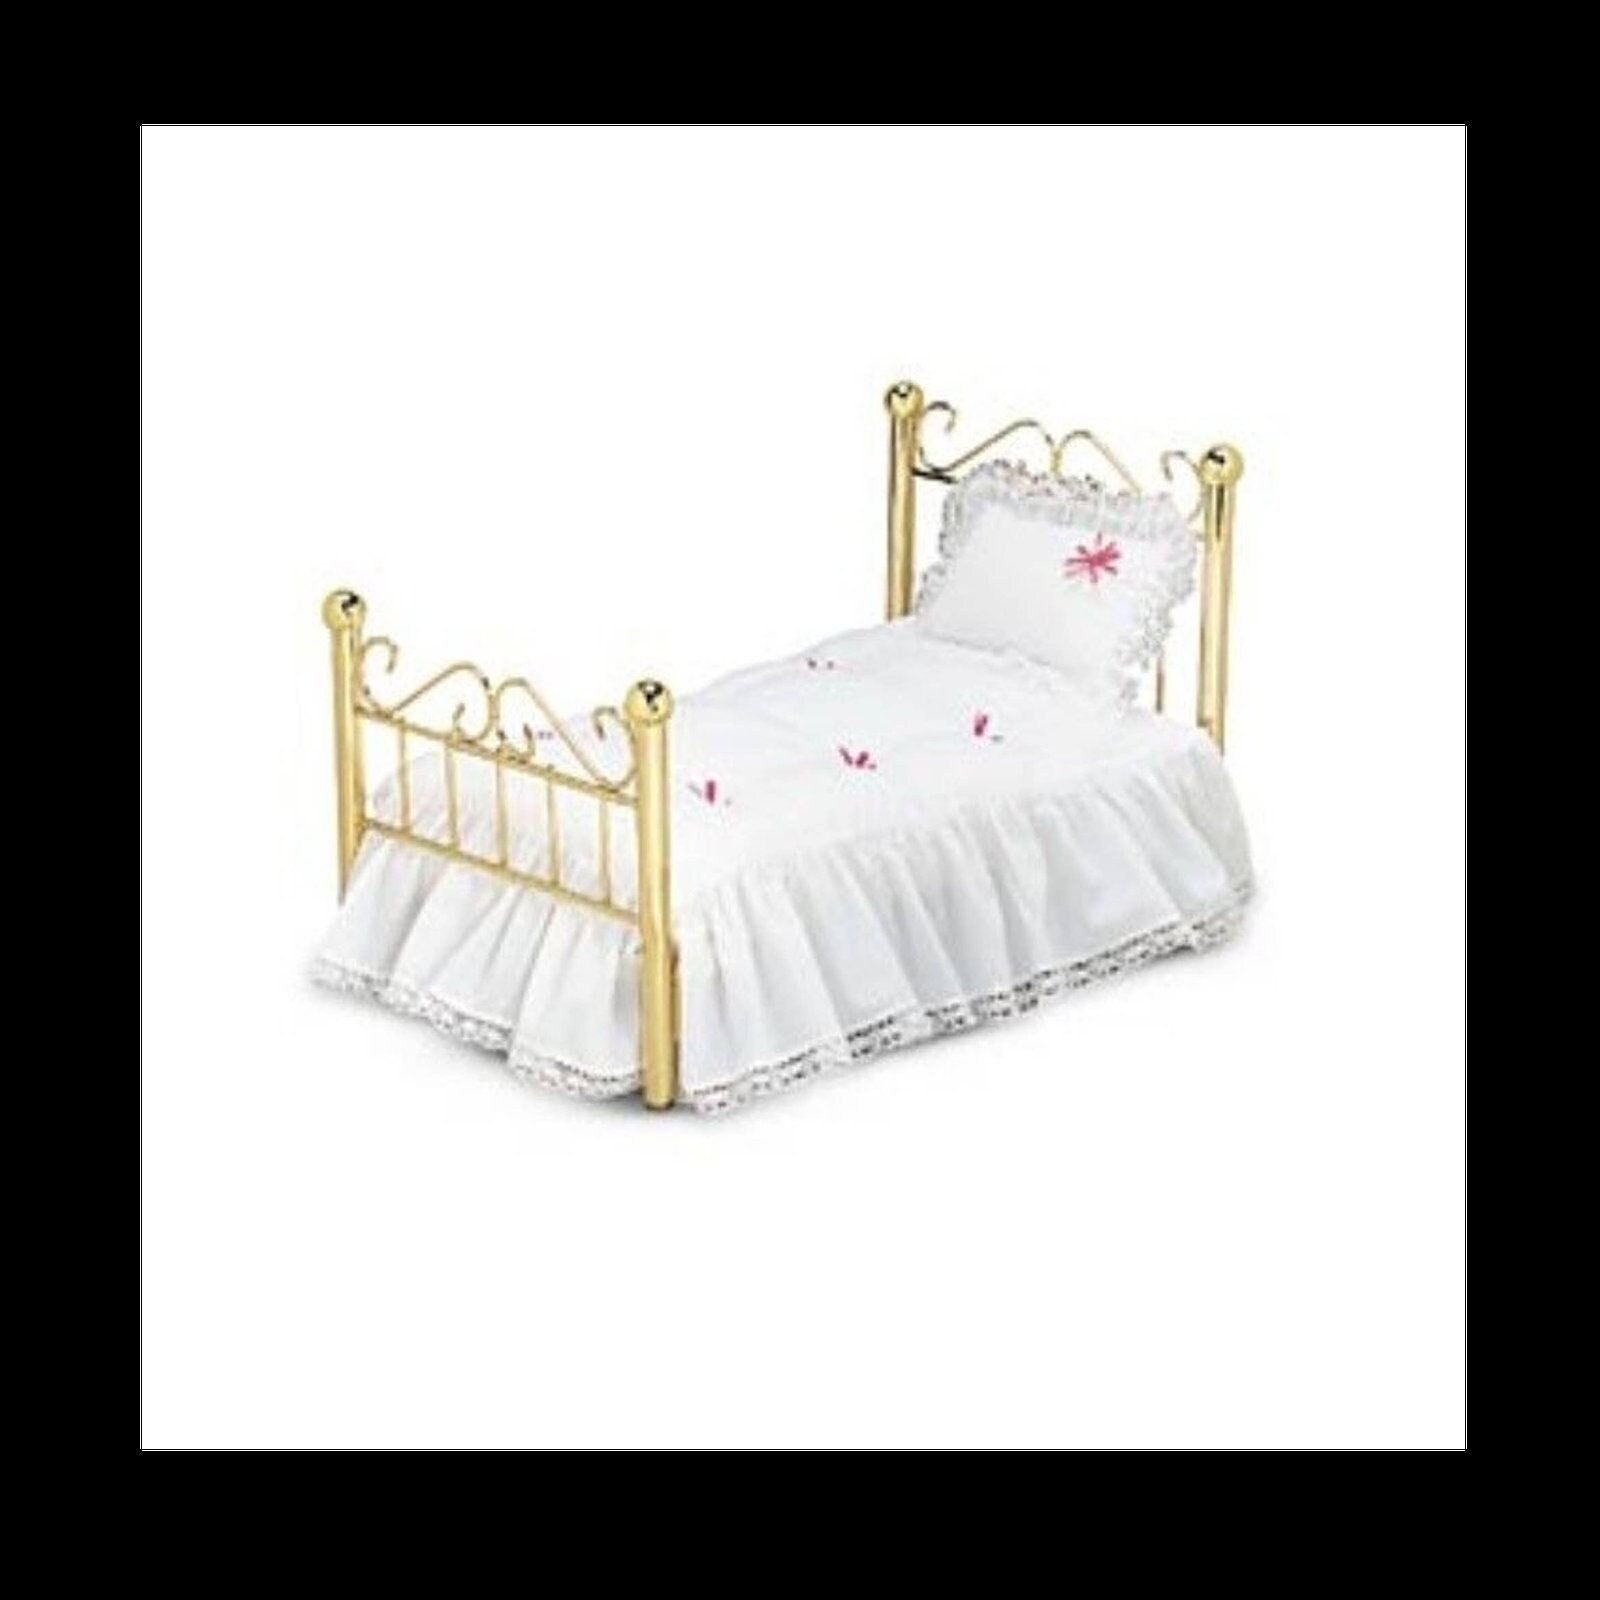 American Girl Samantha's Bed and Bedding - Dolls & Accessories